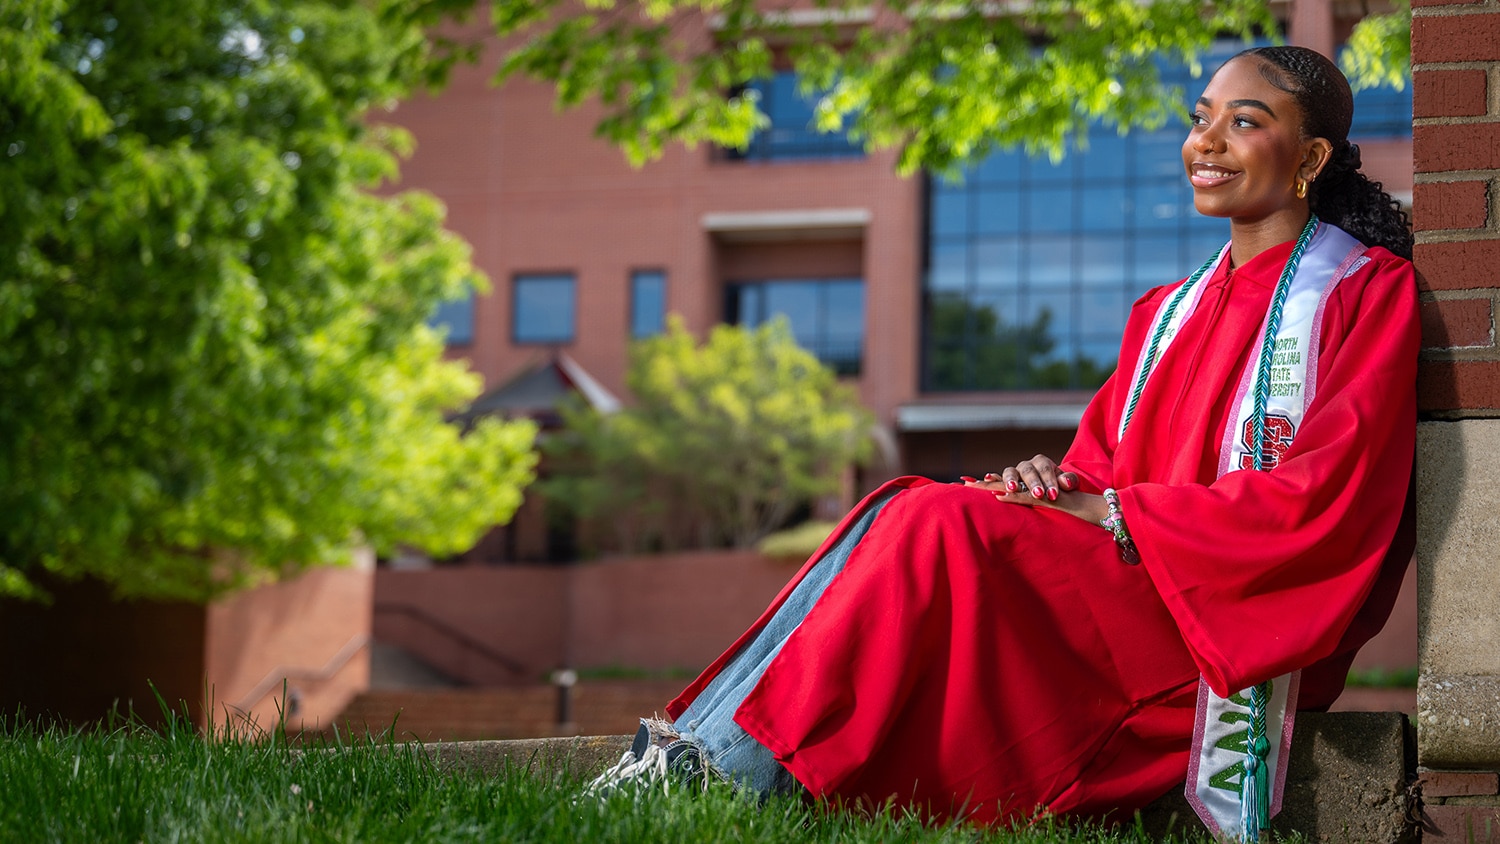 A portrait of Jada Williams seated in her graduation gown